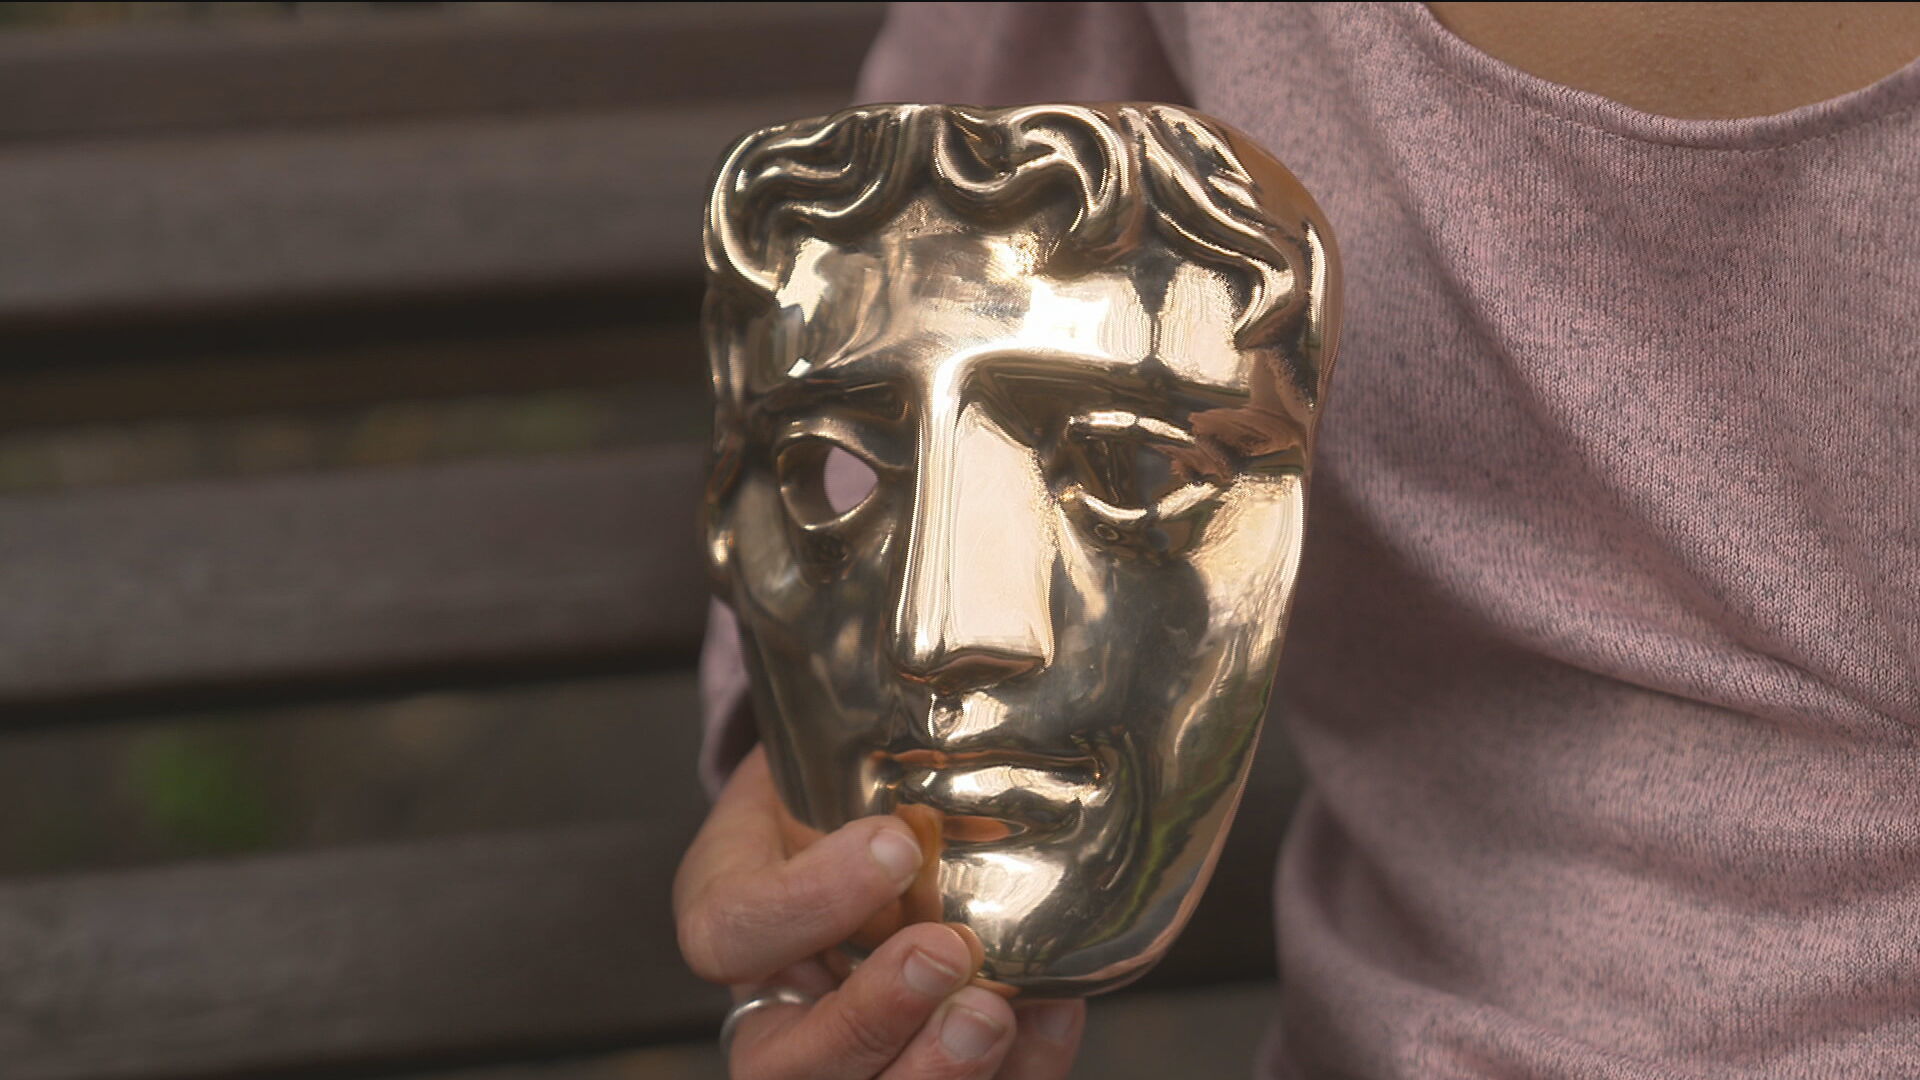 The BAFTAs will emanate from London's Southbank centre next month.